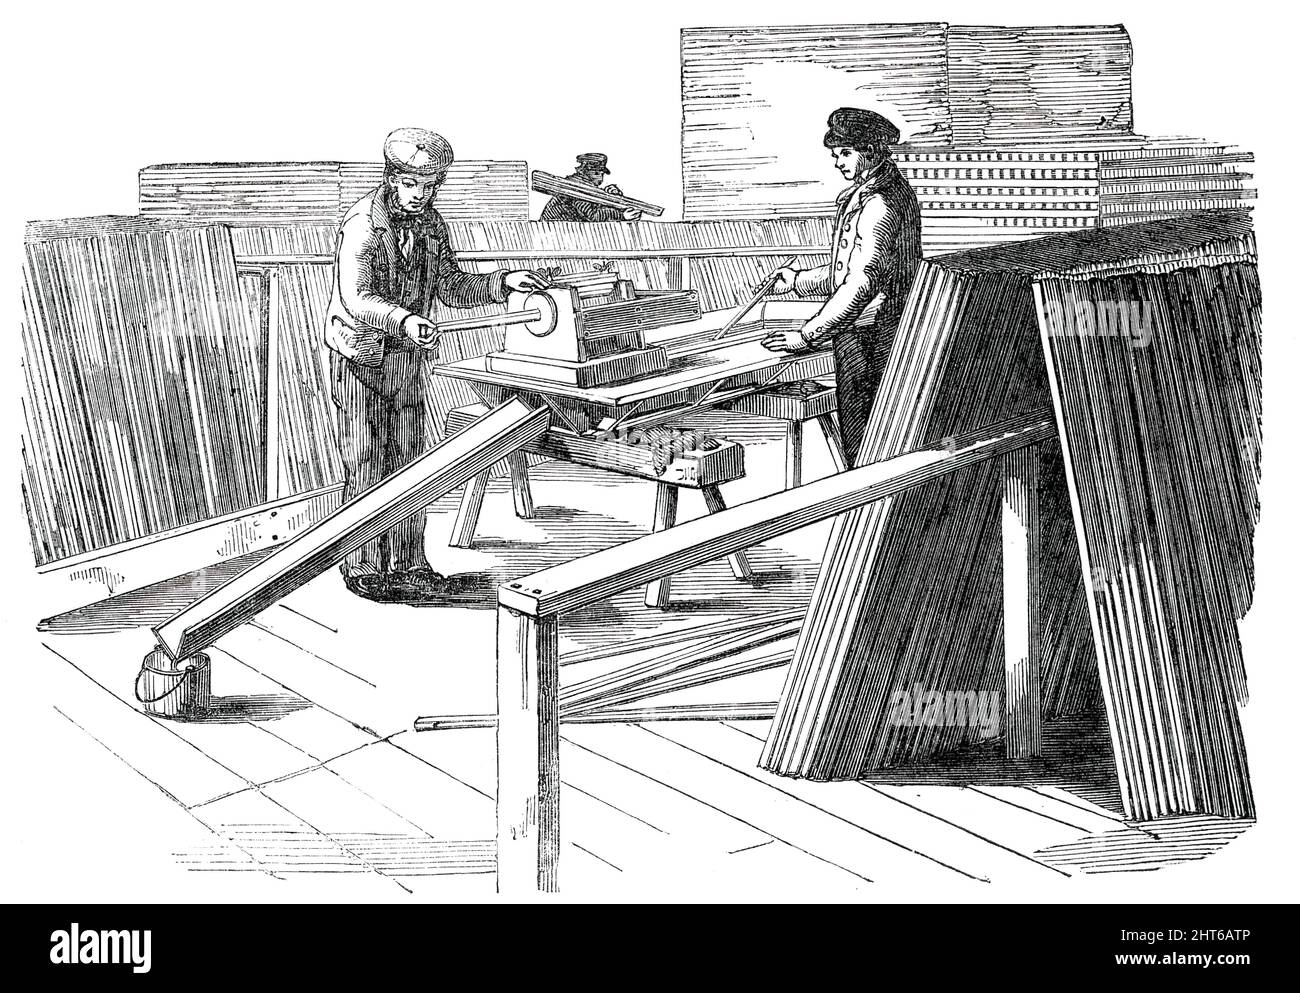 The Great Exhibition Building in Hyde Park - Painting Machine, 1850. View of '...the sash-bar painting apparatus...One of the sash-bars is occasionally passed between the brushes, to keep them clean. After being primed, it is placed in a wooden tank, containing paint of the consistence suitable for the first coat, and subsequently taken out and passed through the brushes, to remove the superfluous paint, which runs off into a wooden shute placed in an inclined position. Any of our readers who have watched the tedious process of hand-painting sash-bars, will be able to estimate the advantage of Stock Photo